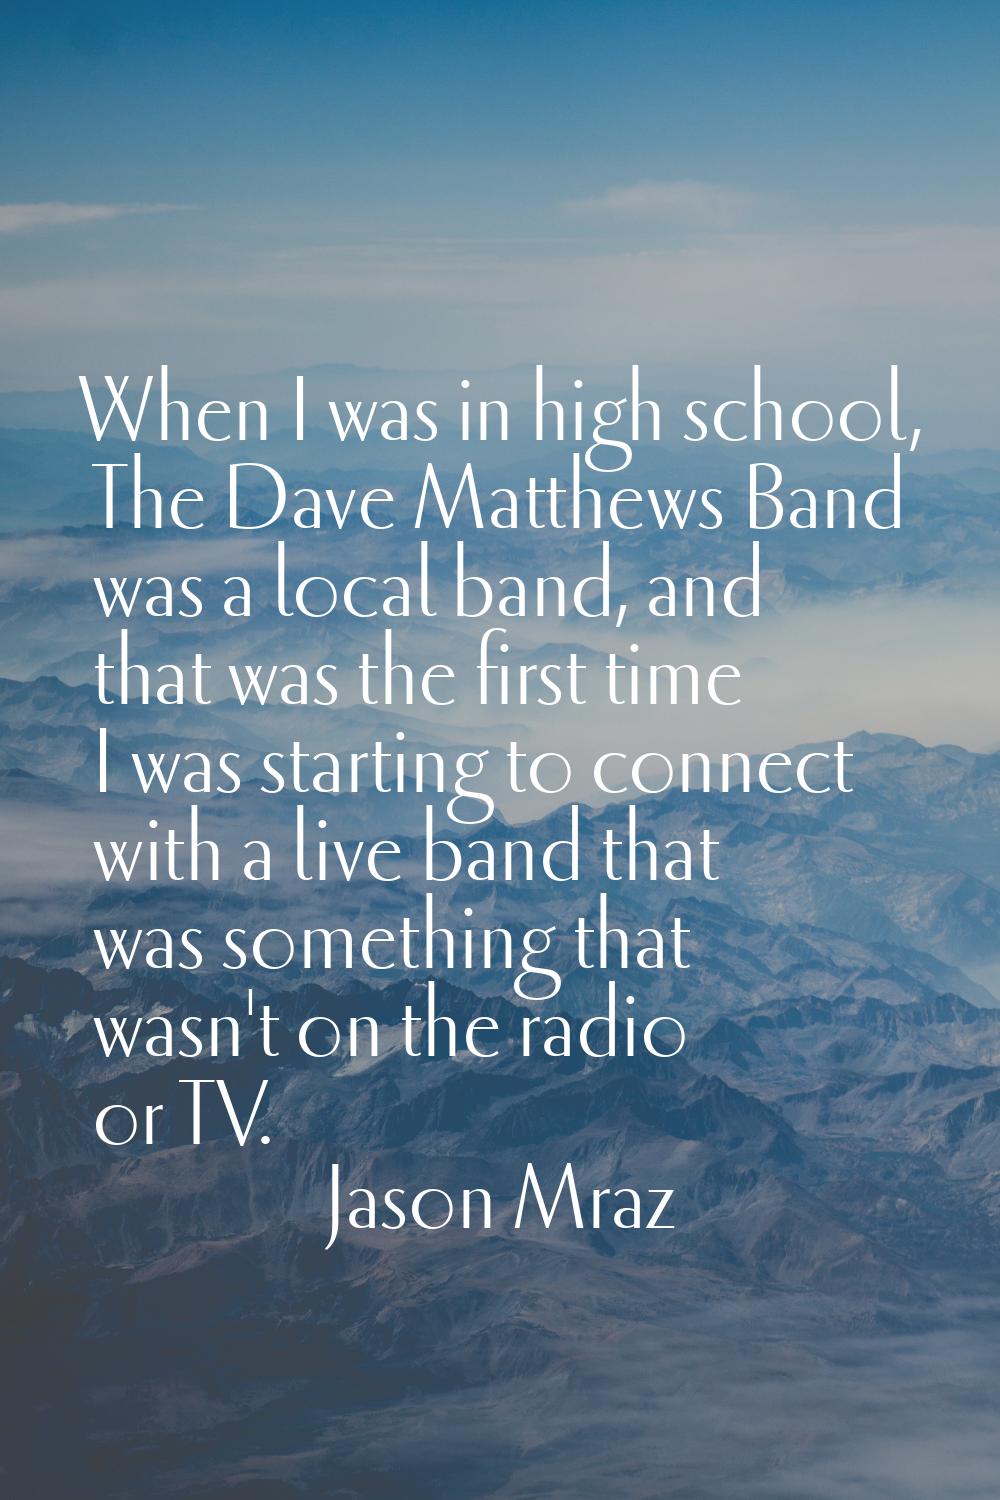 When I was in high school, The Dave Matthews Band was a local band, and that was the first time I w